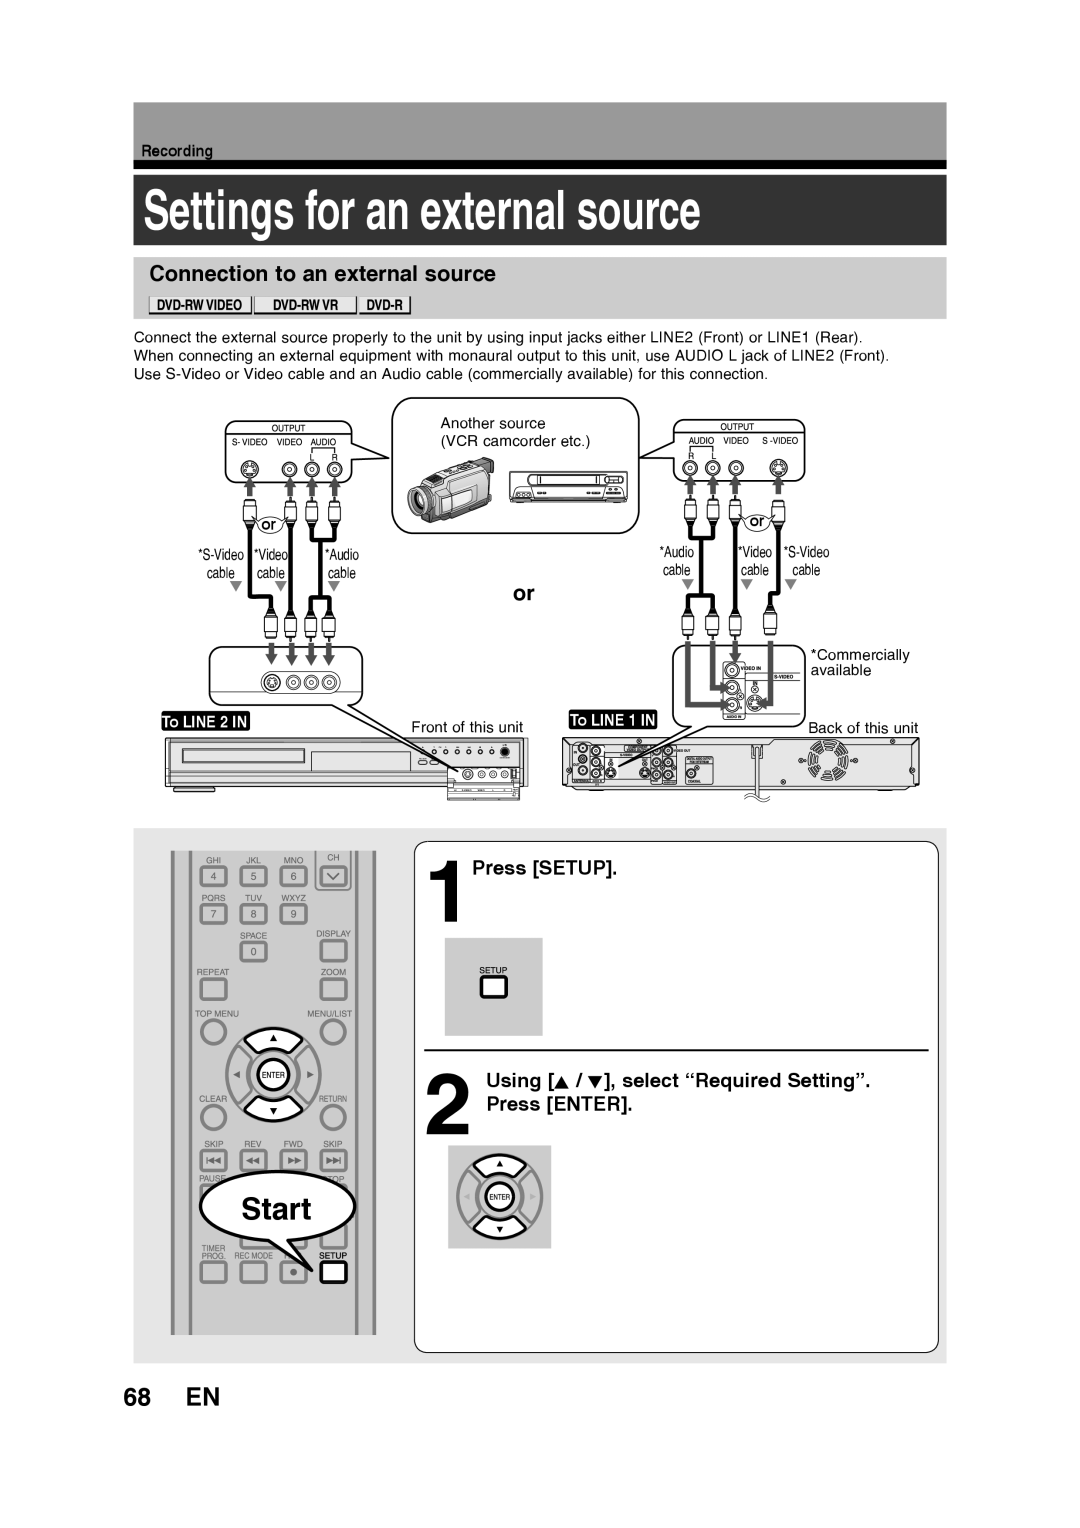 Toshiba D-RW2SU/D-RW2SC manual Settings for an external source, 68 EN, Connection to an external source, Start, Recording 